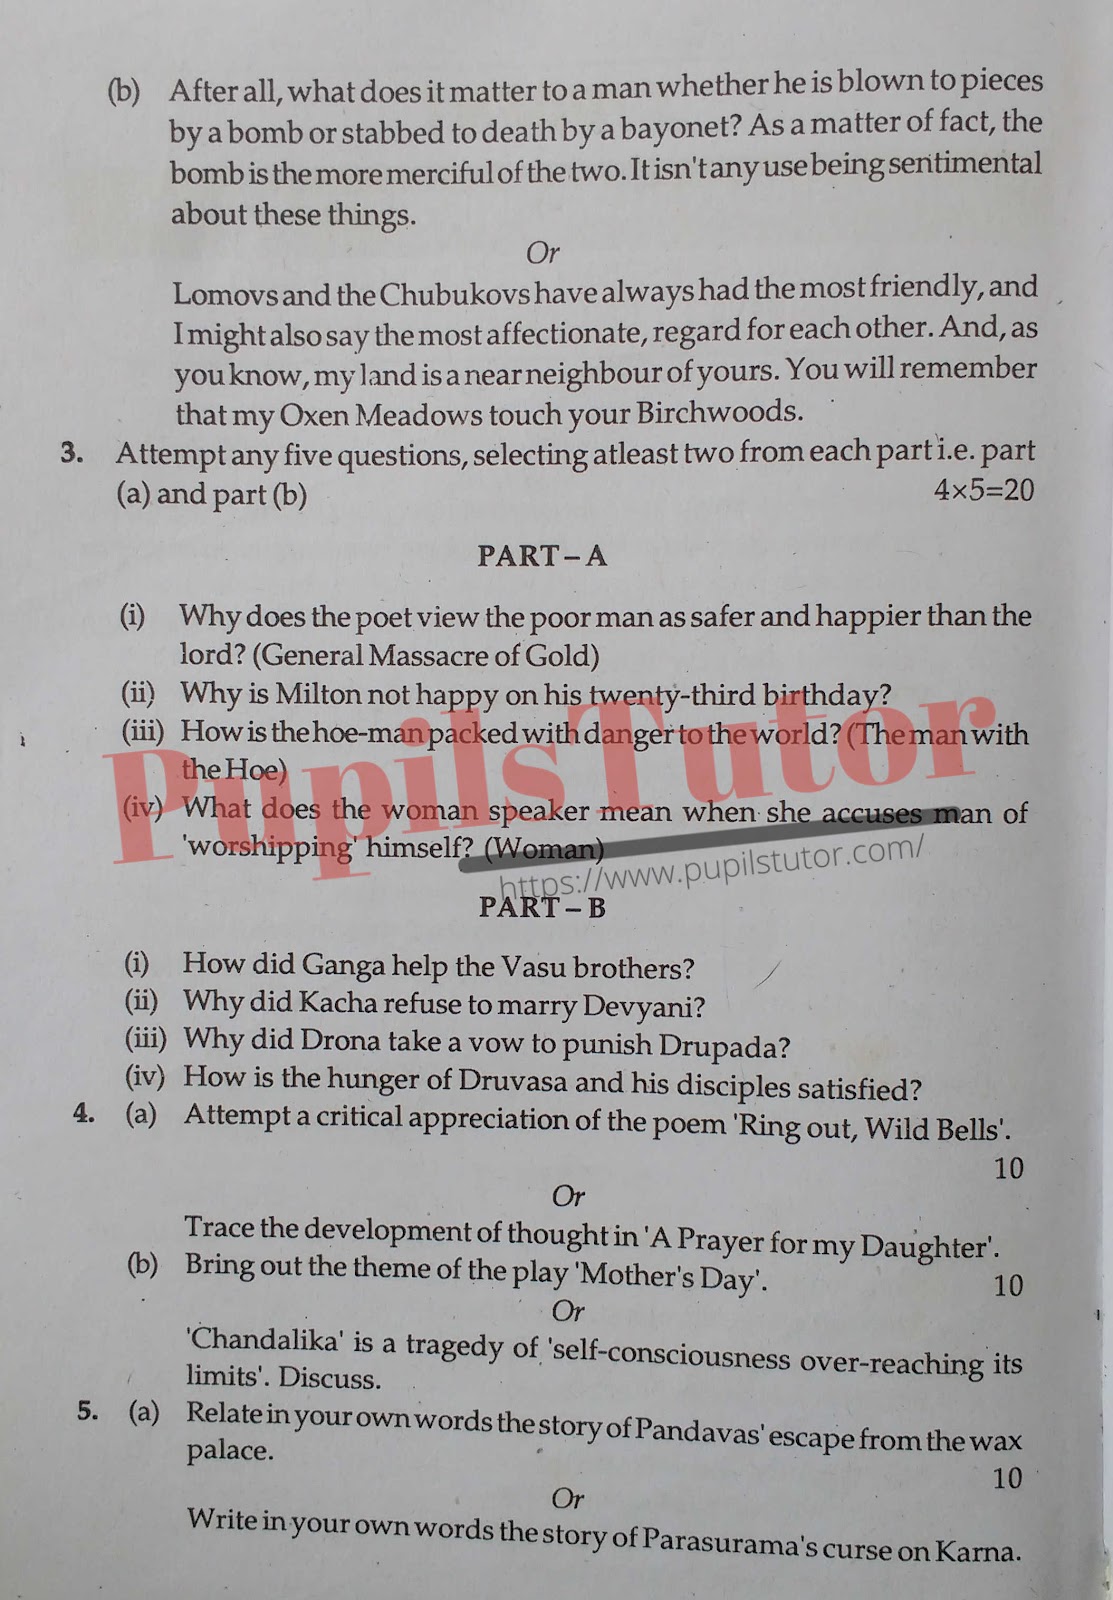 M.D. University B.A. English Second Year Important Question Answer And Solution - www.pupilstutor.com (Paper Page Number 2)